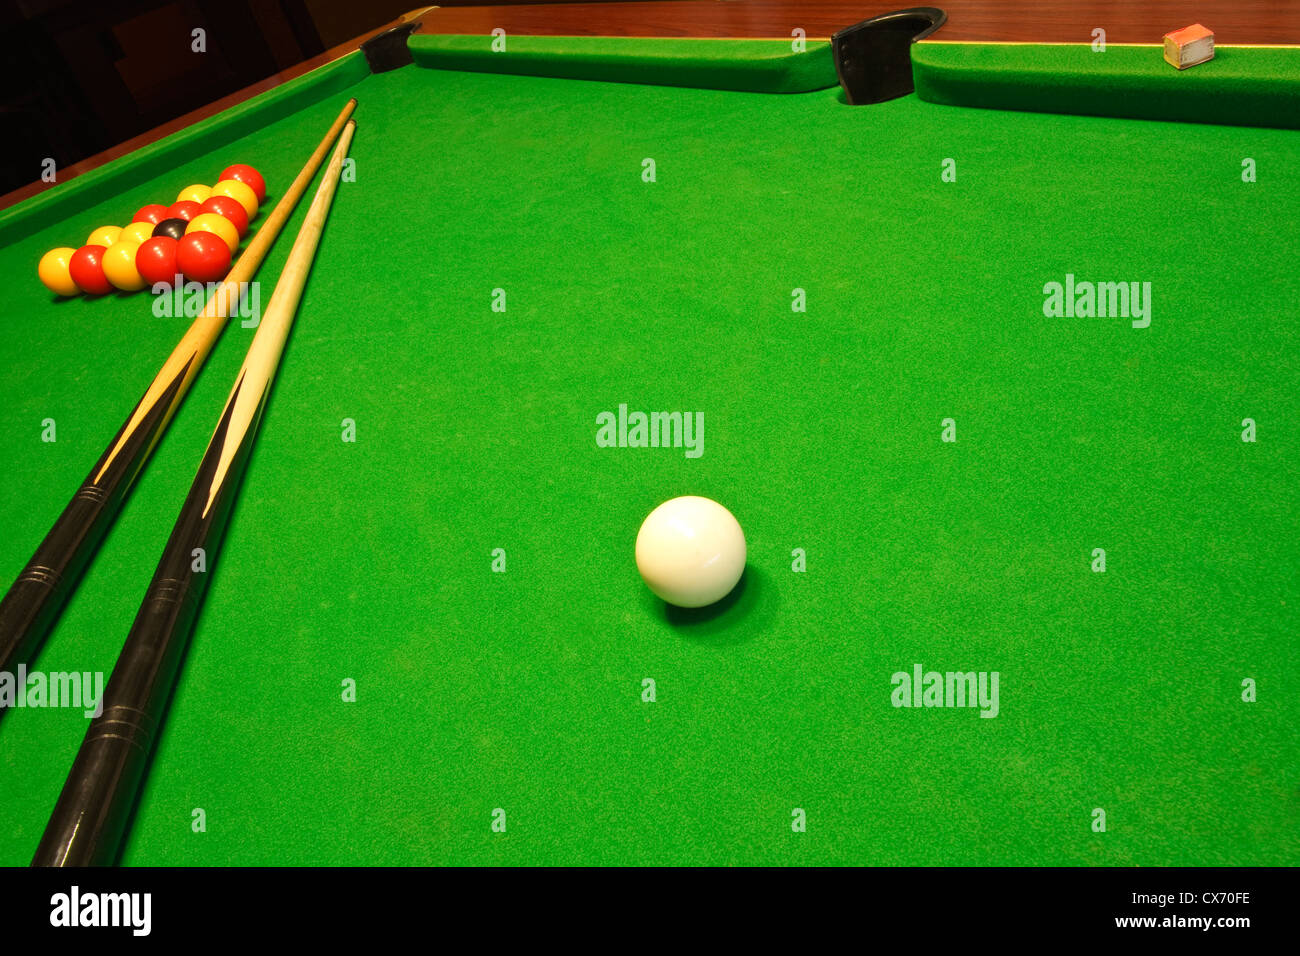 A green cloth billiards or pool table with english league red and yellow balls Stock Photo